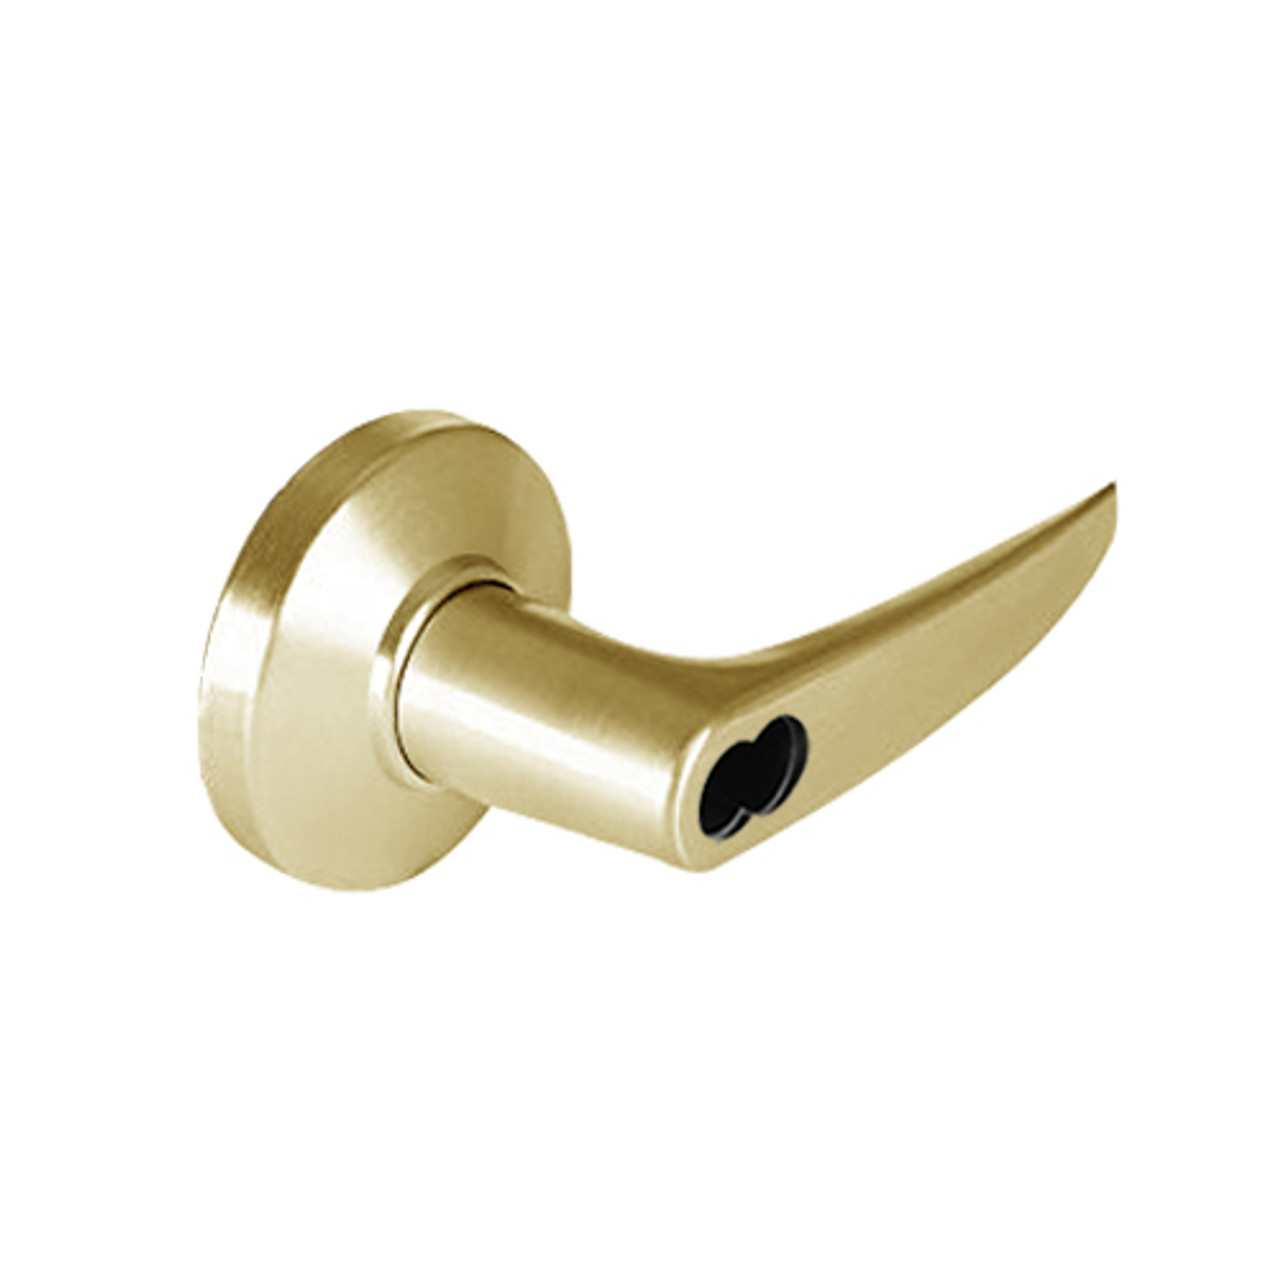 9K37H16CSTK606 Best 9K Series Hotel Cylindrical Lever Locks with Curved without Return Lever Design Accept 7 Pin Best Core in Satin Brass